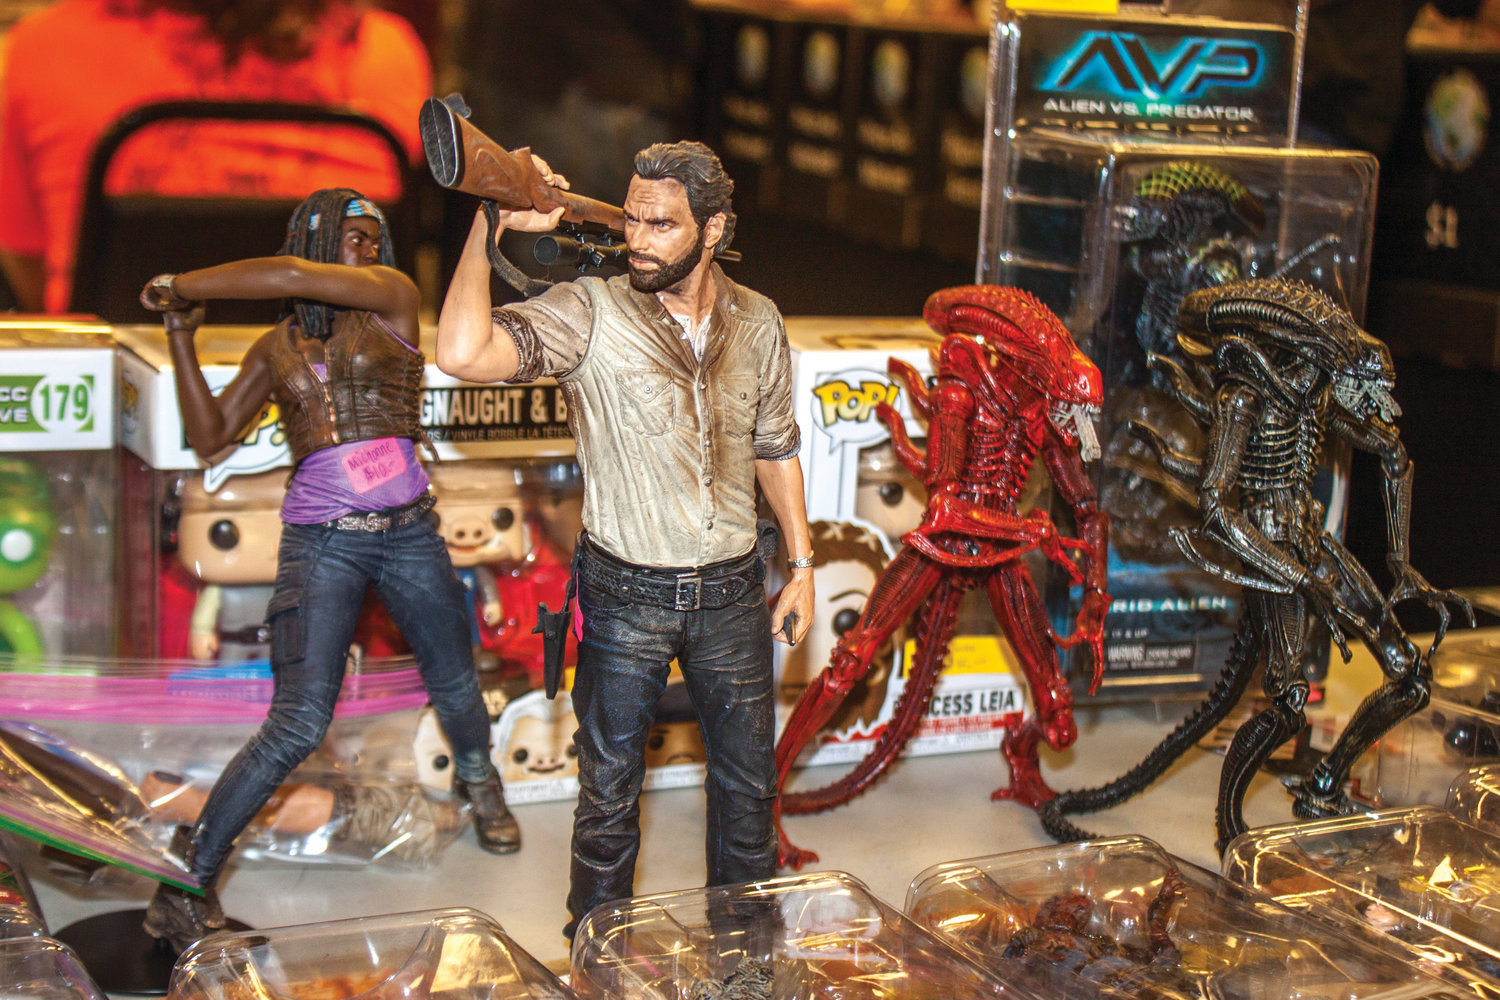 Comic Book Swap Meet in Chimacum included action figures such as Rick Grimes and Michonne of “The Walking Dead” facing off against a pair of Xenomorphs from the “Aliens.”